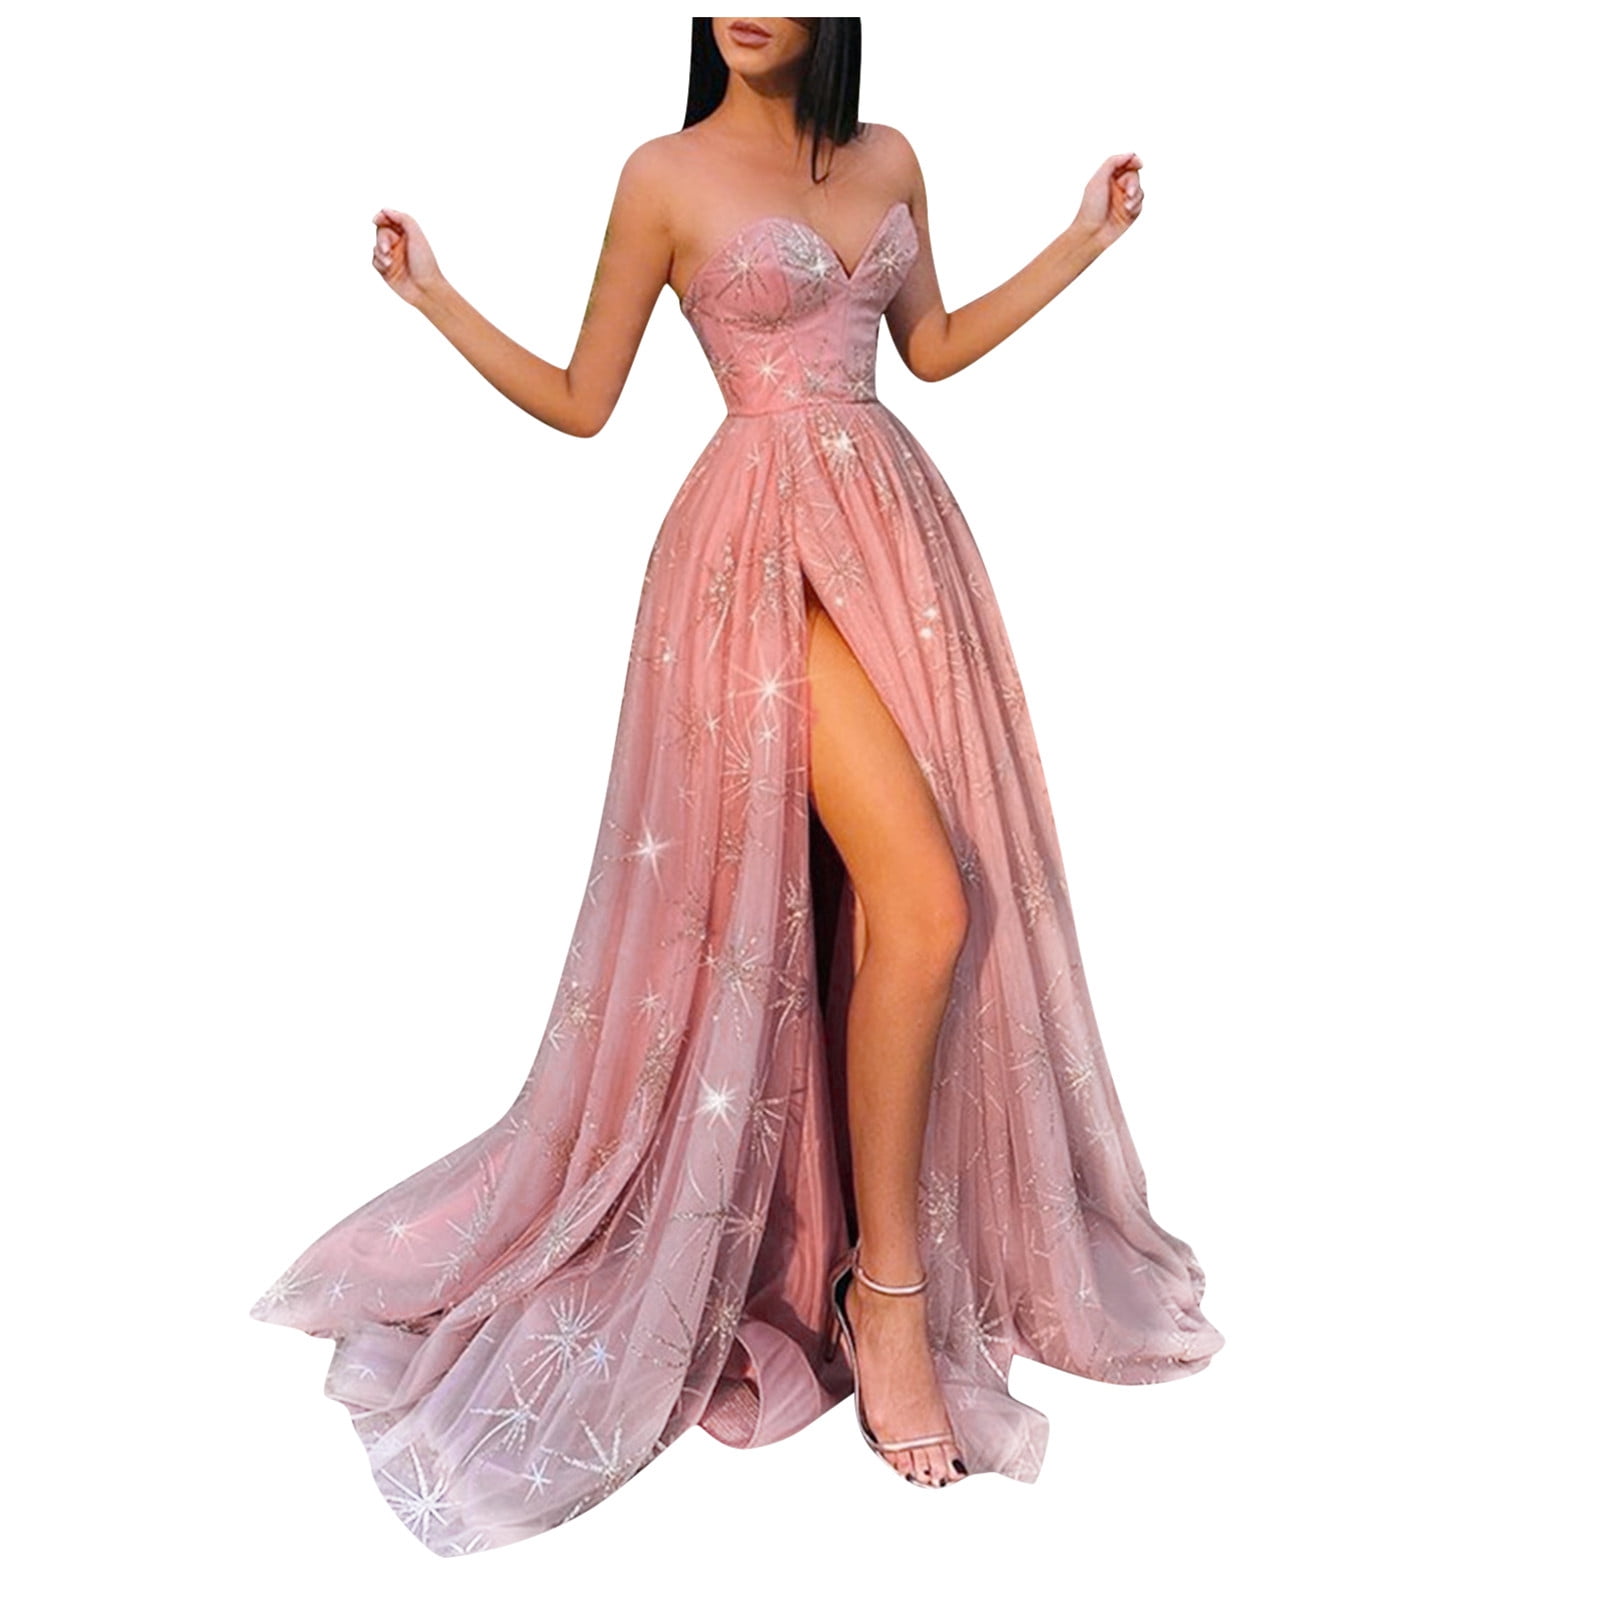 Formal Long Chiffon Pleated Bridesmaid Women Evening Prom Ball Gown Party Dress 